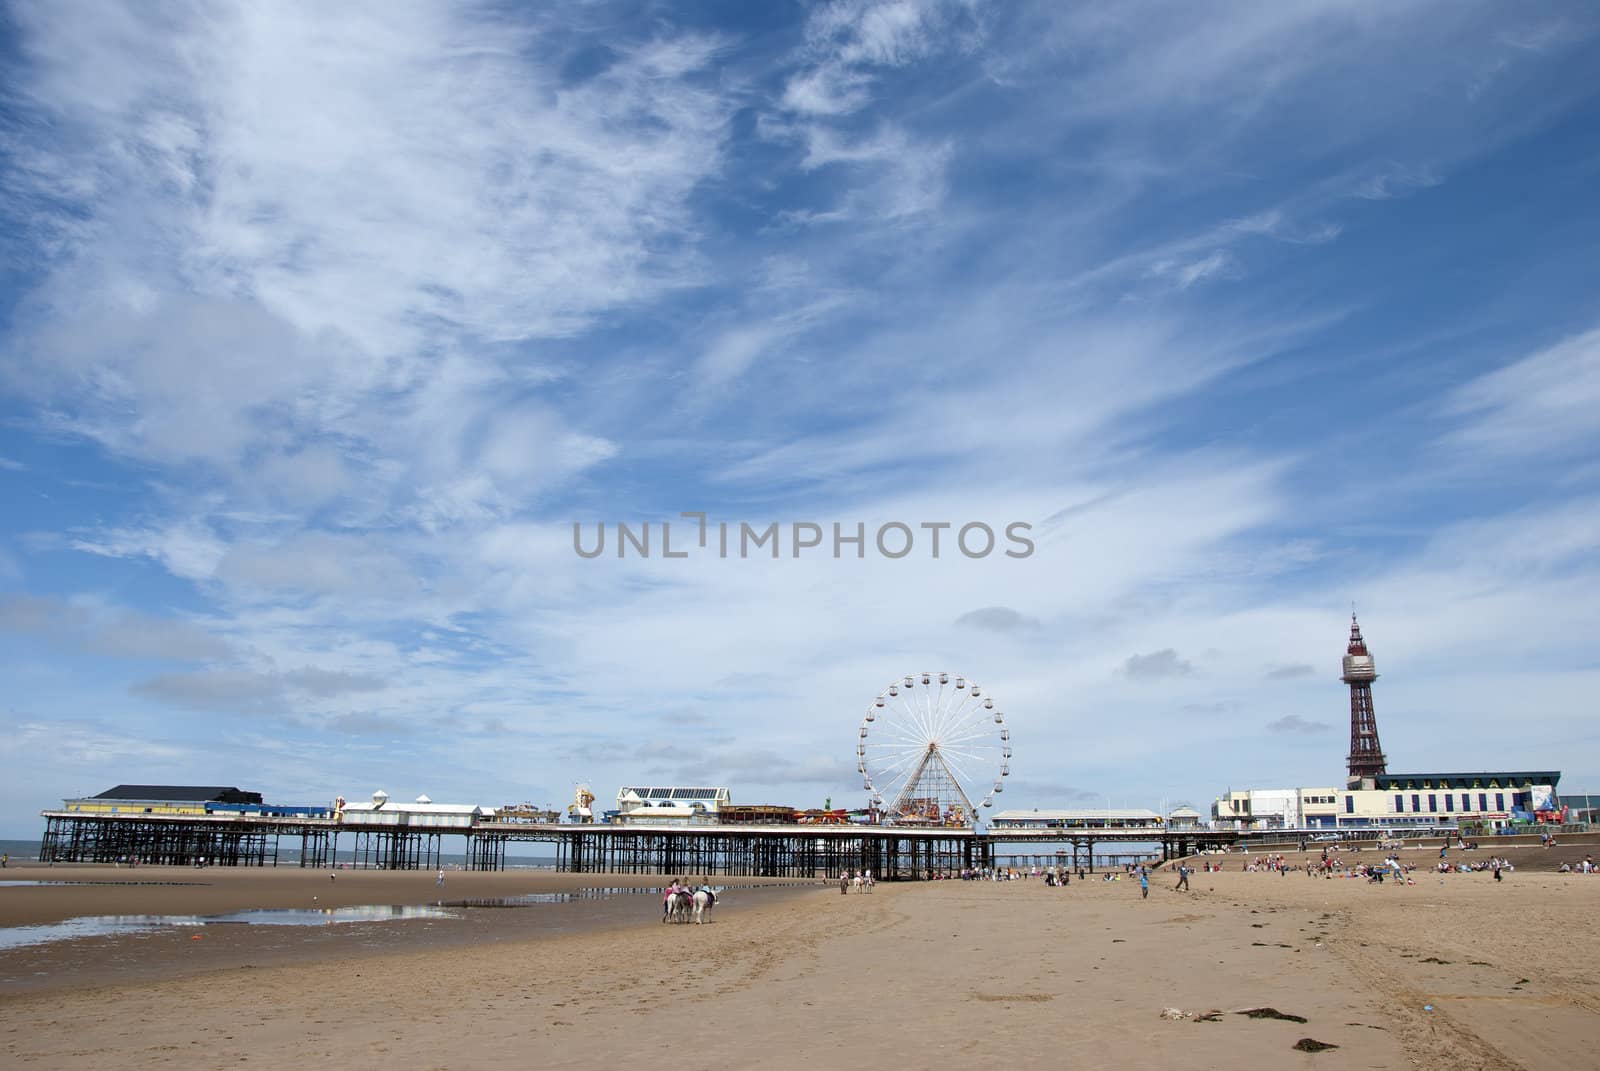 Central Pier and Blackpool Tower from the Beach by d40xboy